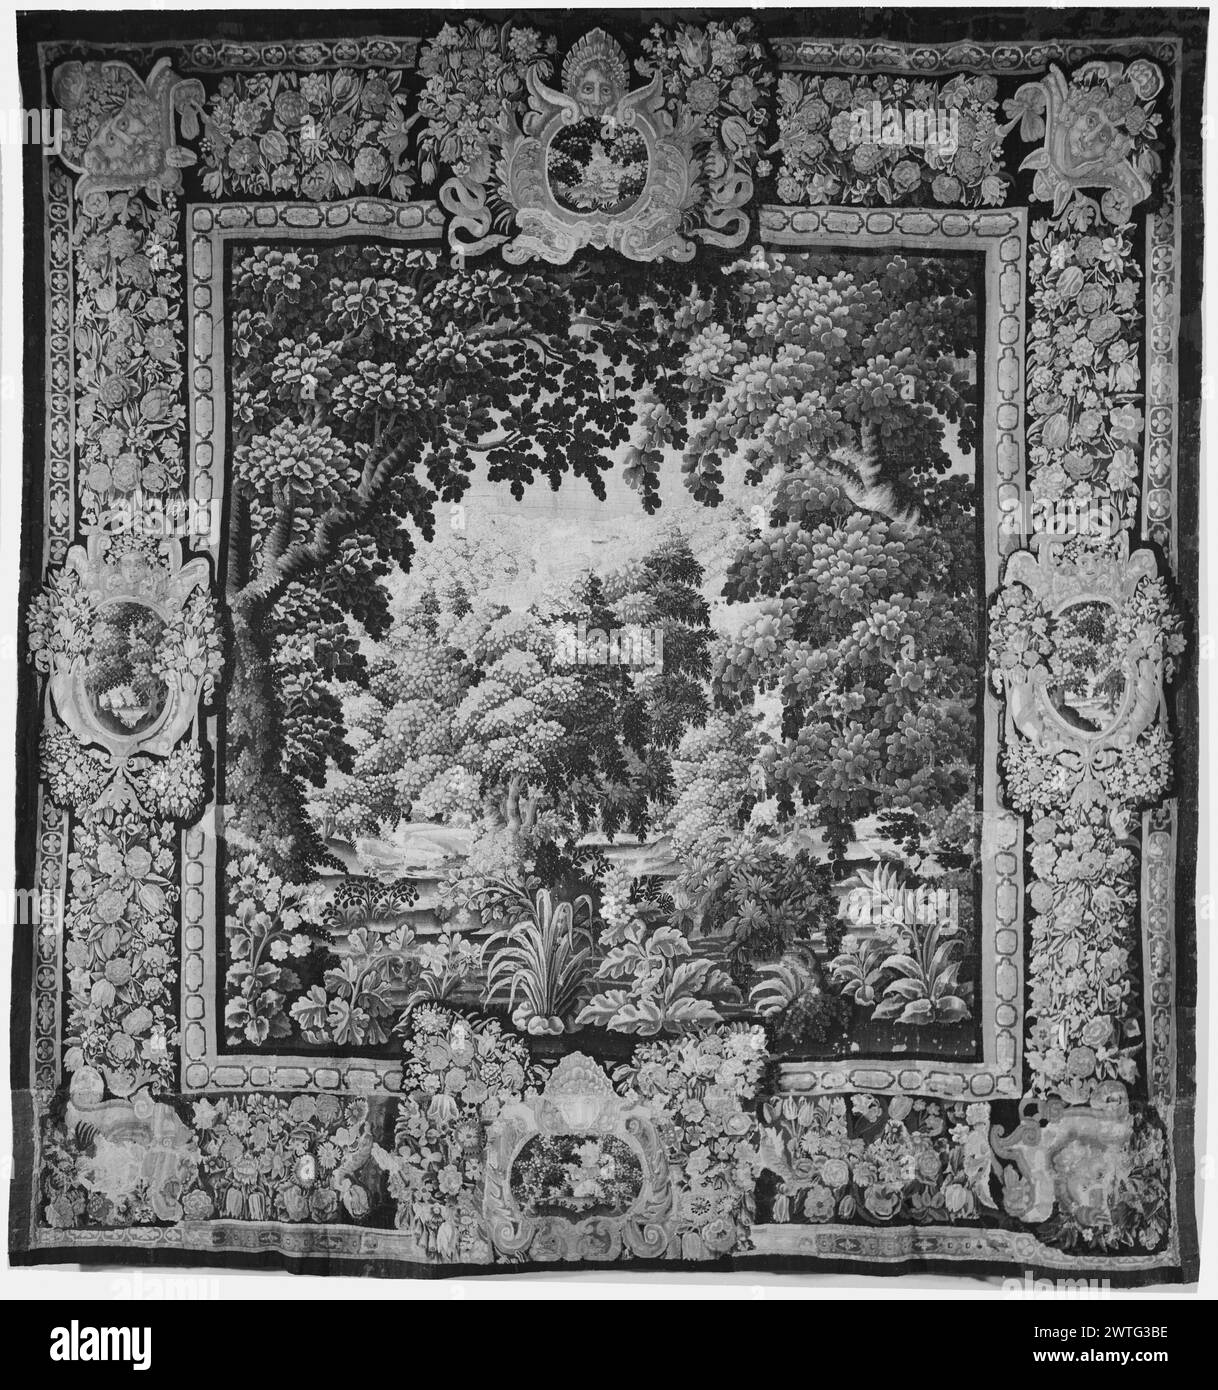 Landscape. unknown c. 1640-1670 Tapestry Dimensions: H 11'9' x W 11'4' Tapestry Materials/Techniques: unknown Culture: French Weaving Center: Aubusson Ownership History: French & Co. Lush landscape with flowering plants & trees intersected by narrow river in foreground (BRD) richly decorated border framed by strips of stylized quatrefoil with garland of flowers & leaves interrupted by elaborate reserves: (L & R BRD) landscape cartouche suspended by tied ribbon & topped with female head with bunch of flowers on either side & framed by festoons; (UPR BRD) male mask above landscape cartouche fram Stock Photo